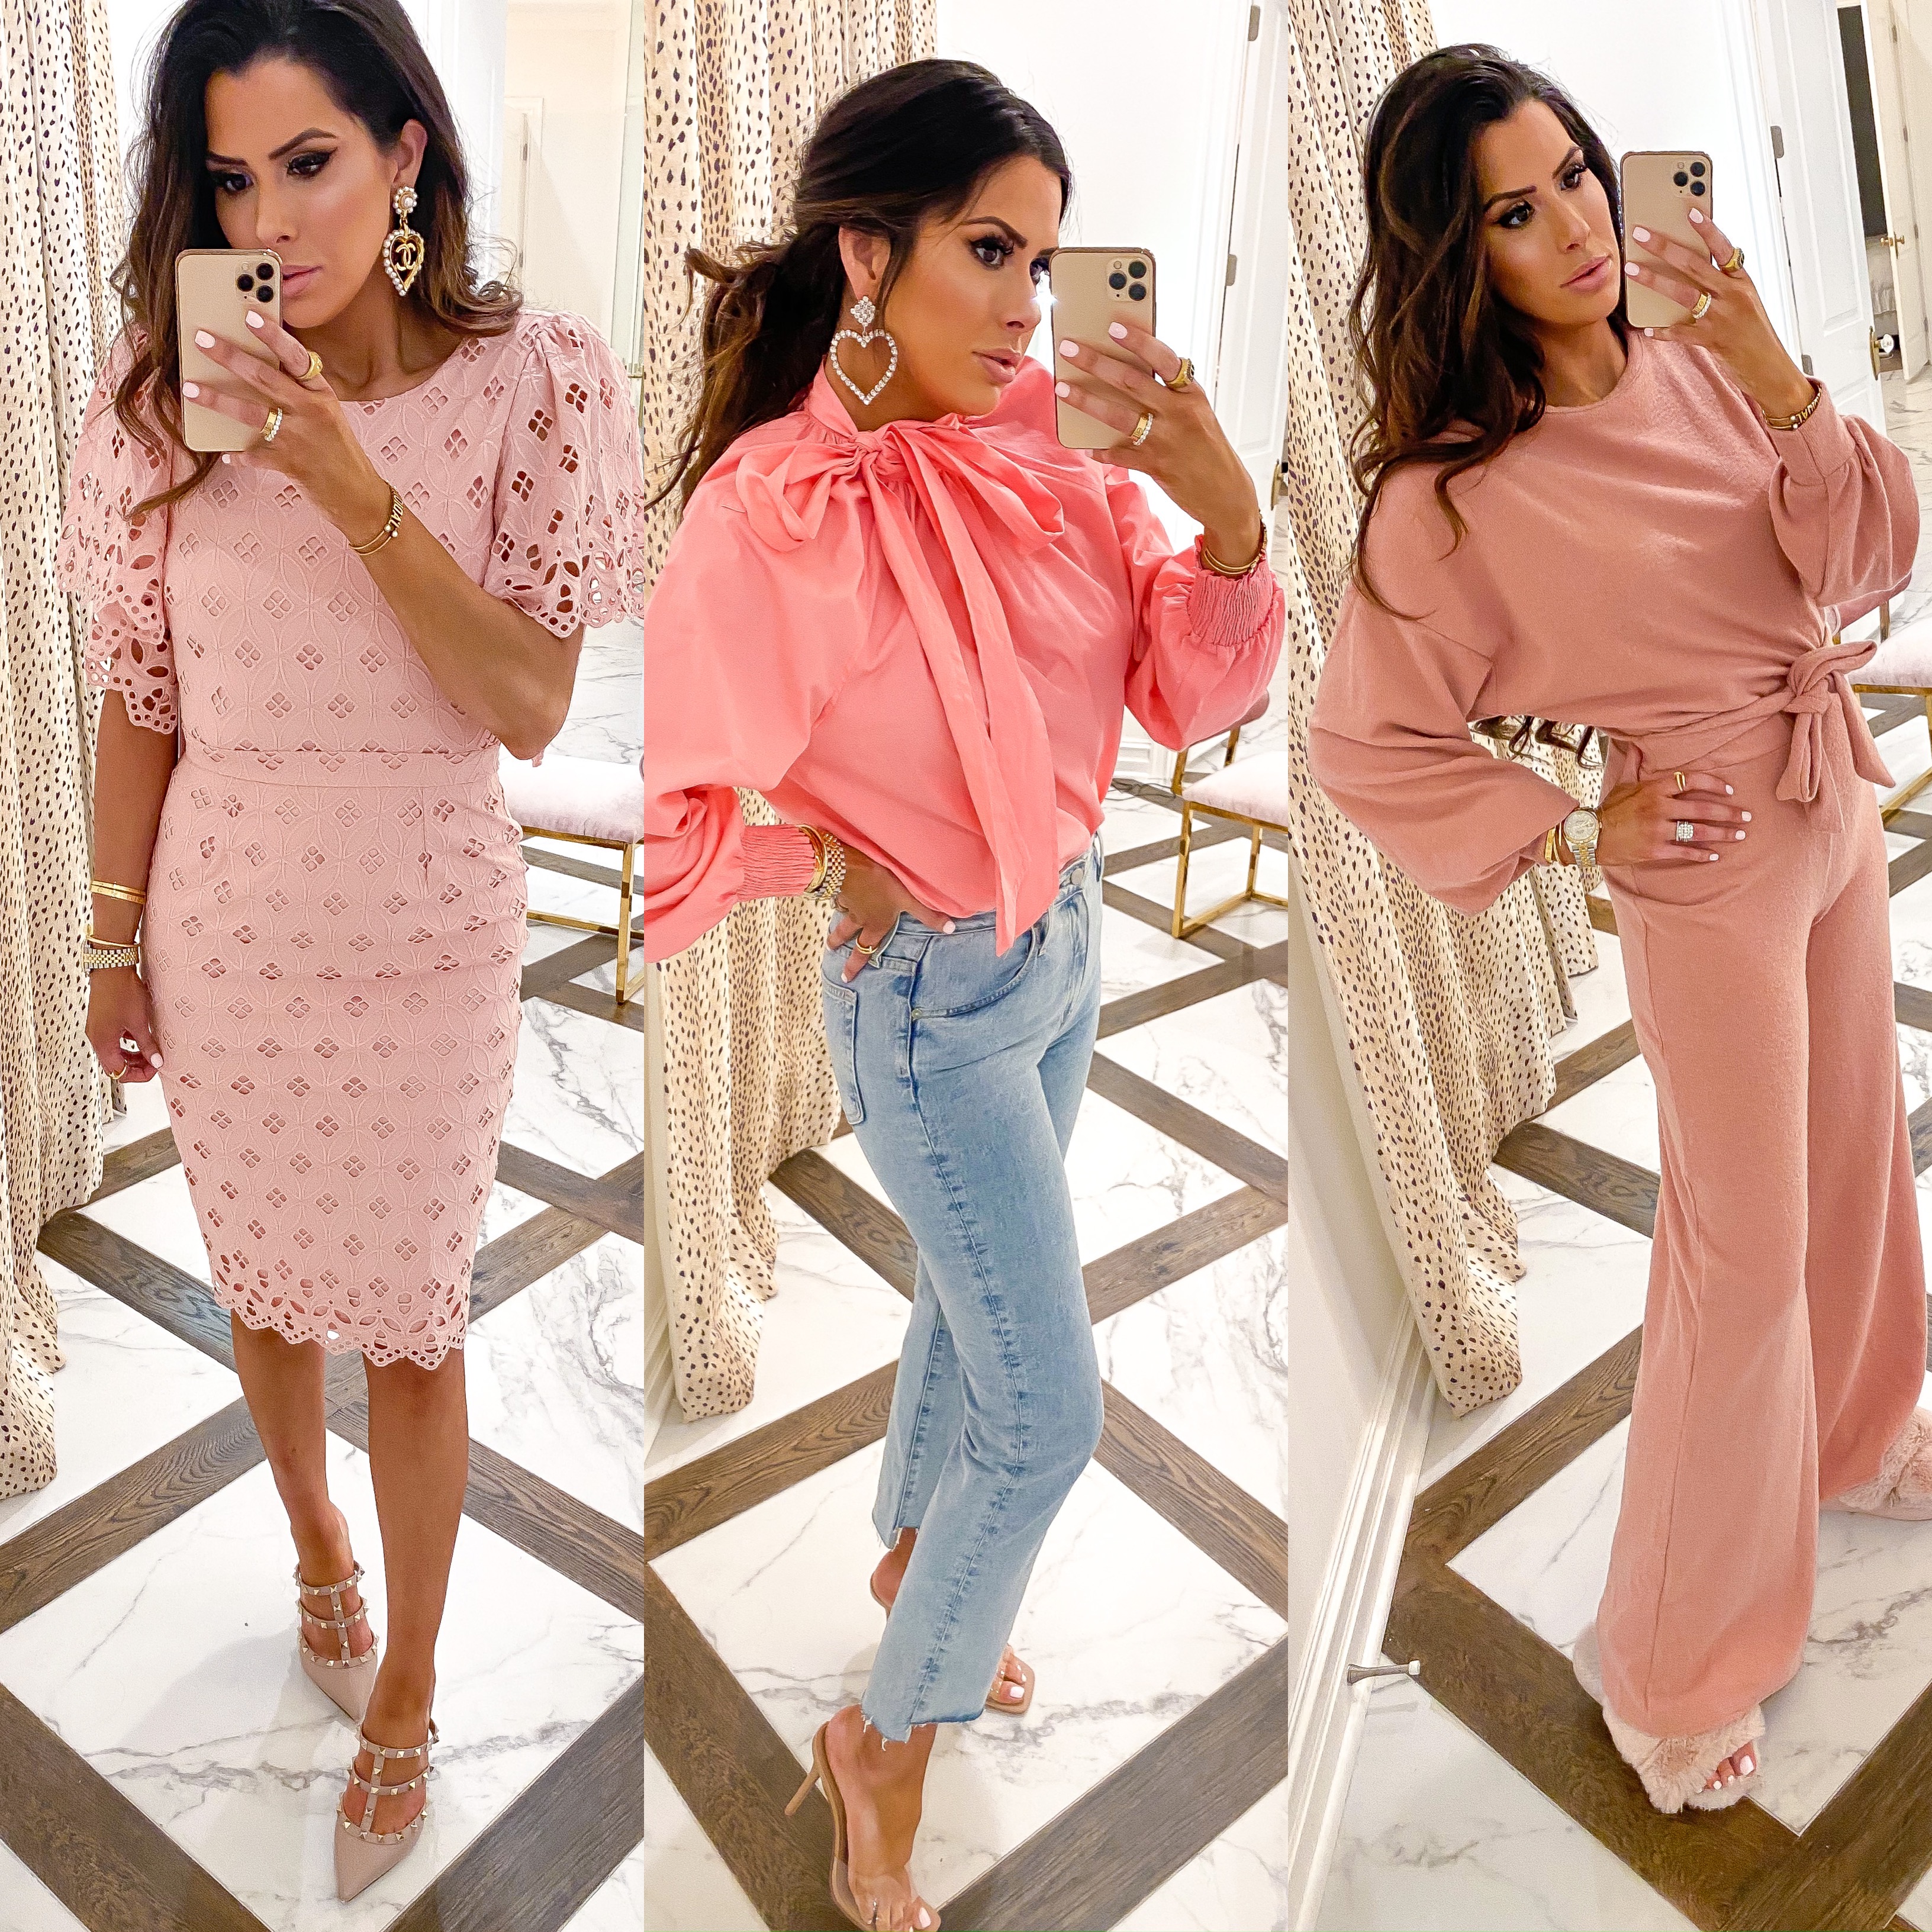 Valentines day outfit ideas 2020, rachel parcell pink dress | Valentine's Day Outfit Ideas by popular US fashion blog, The Sweetest Thing: collage image of a woman wearing 3 different pink outfits. 